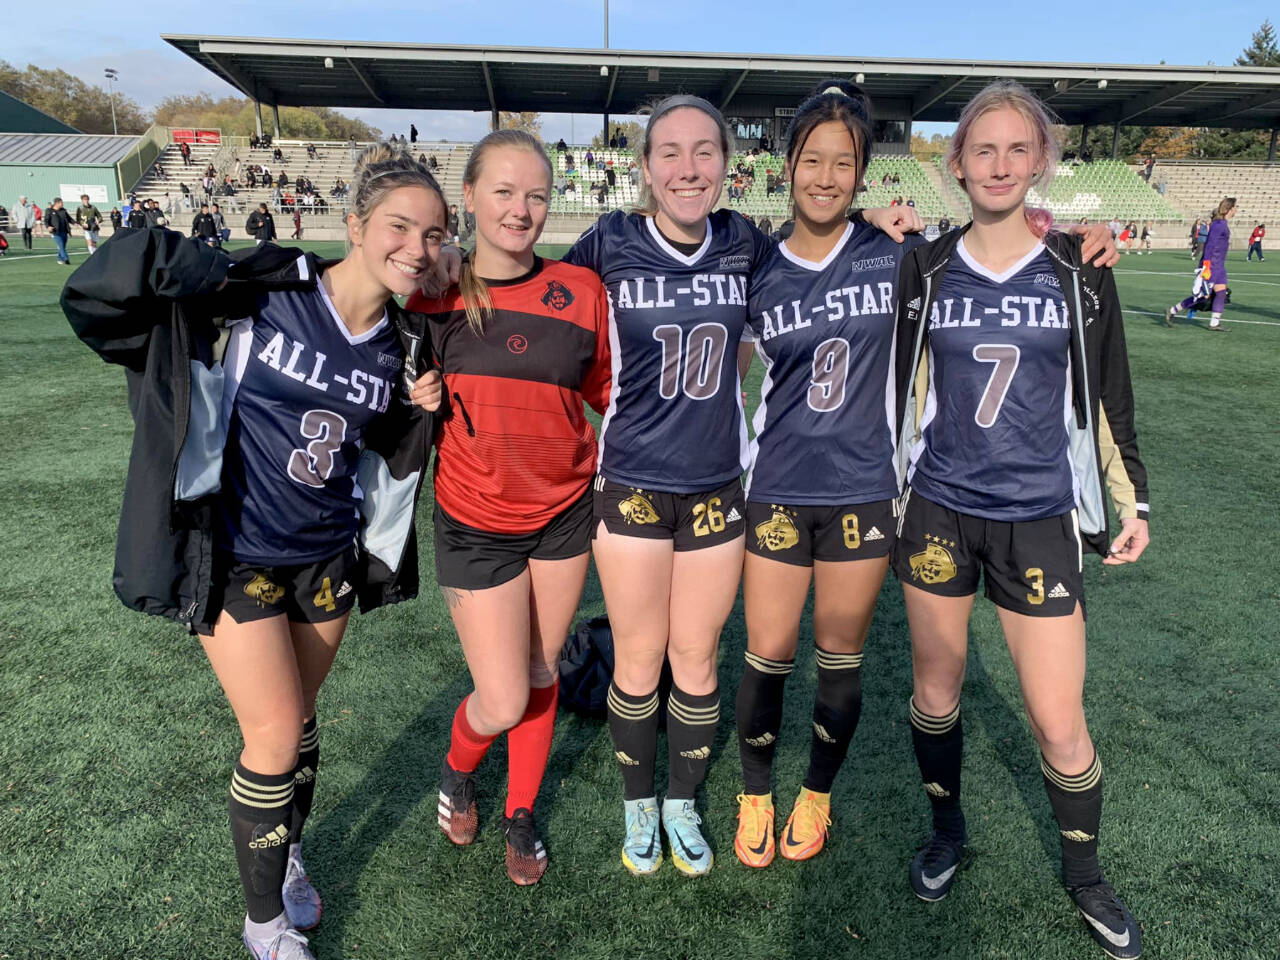 Peninsula College The Peninsula College women’s North all-stars competed Sunday at the Starfire Soccer Complex in Tukwila. From left, Rylee Sims, Frida Markstrom, Kenzie Banner, Chiaki Takase and Millie Long.